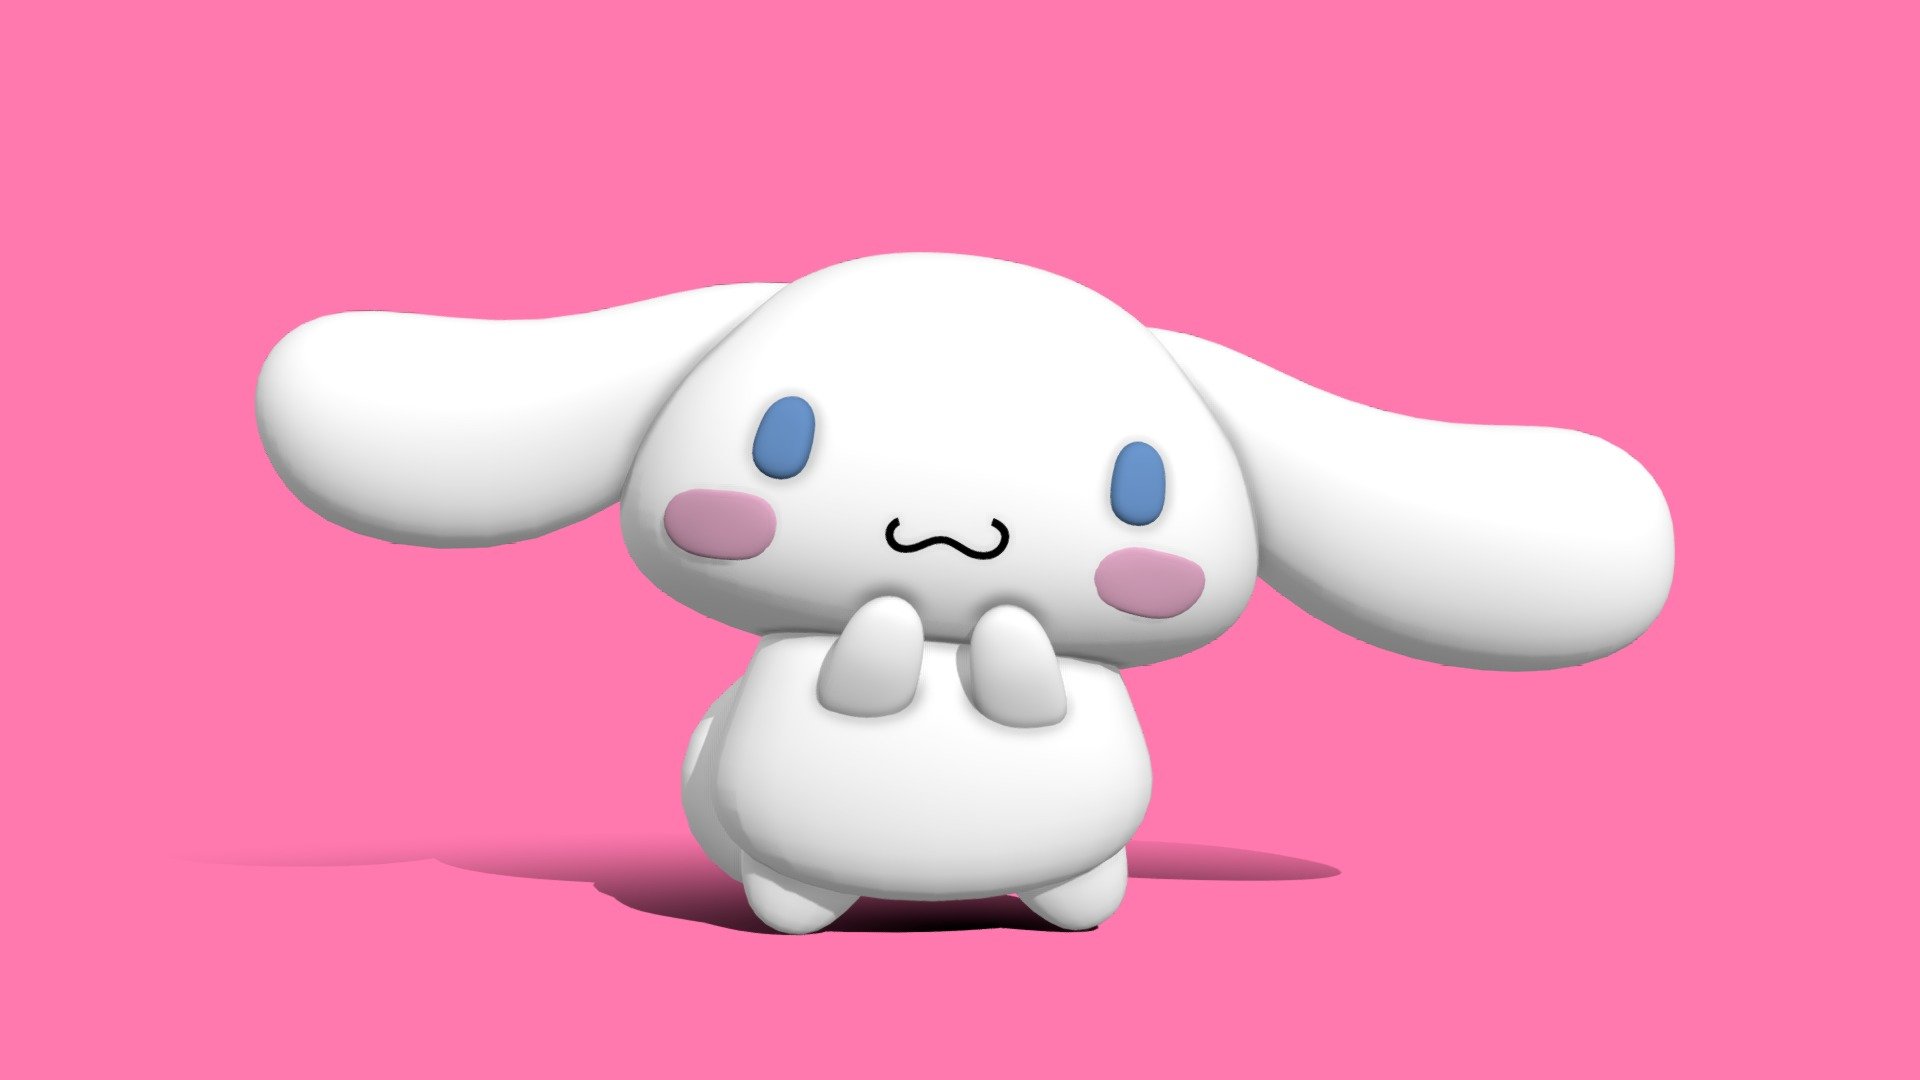 A simple and cute 3D model of popular Sanrio character Cinnamoroll.

File Formats





FBX - Not Rigged




glTF - Not Rigged




OBJ




STL




Native 3.5 Blender File



STL is recomended for 3D printing

Polygons:
17,134

Vertices:
8,595 - Sanrio Cinnamoroll 3D Model - Buy Royalty Free 3D model by SirSquiggles 3d model